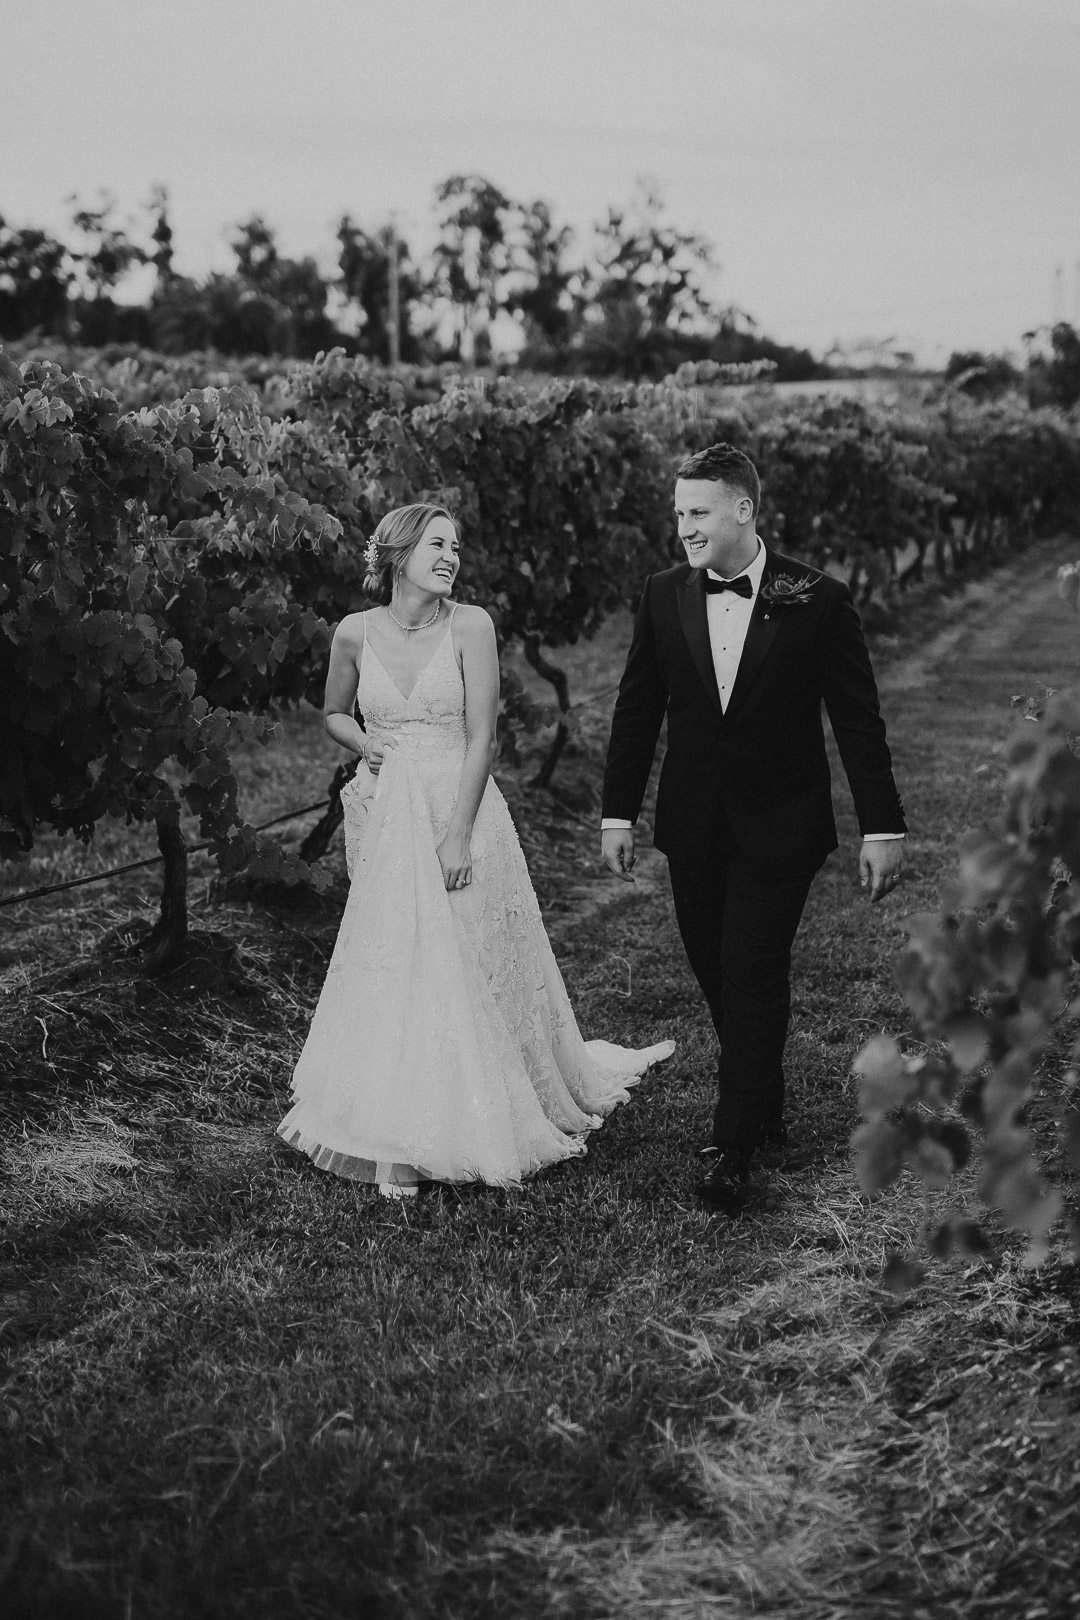 A couple walking through the vines in the vineyard at Bimbadgen Palmers Lane wedding venue in the hunter valley. it is a black and white image which looks classy and elegant but still fun!